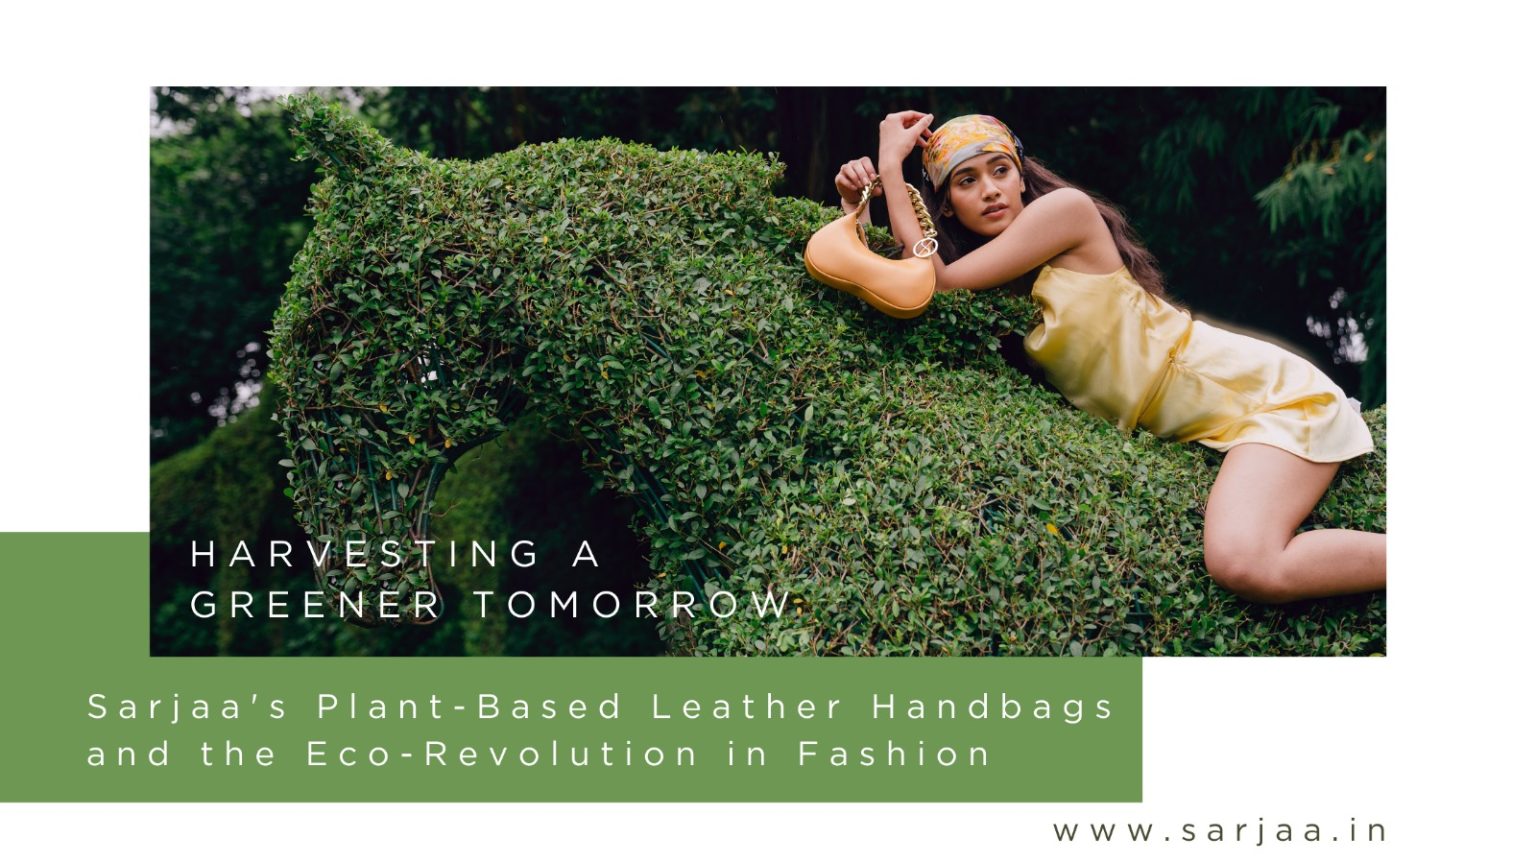 Sarjaa’s Plant-Based Leather Handbags and the Eco-Revolution in Fashion